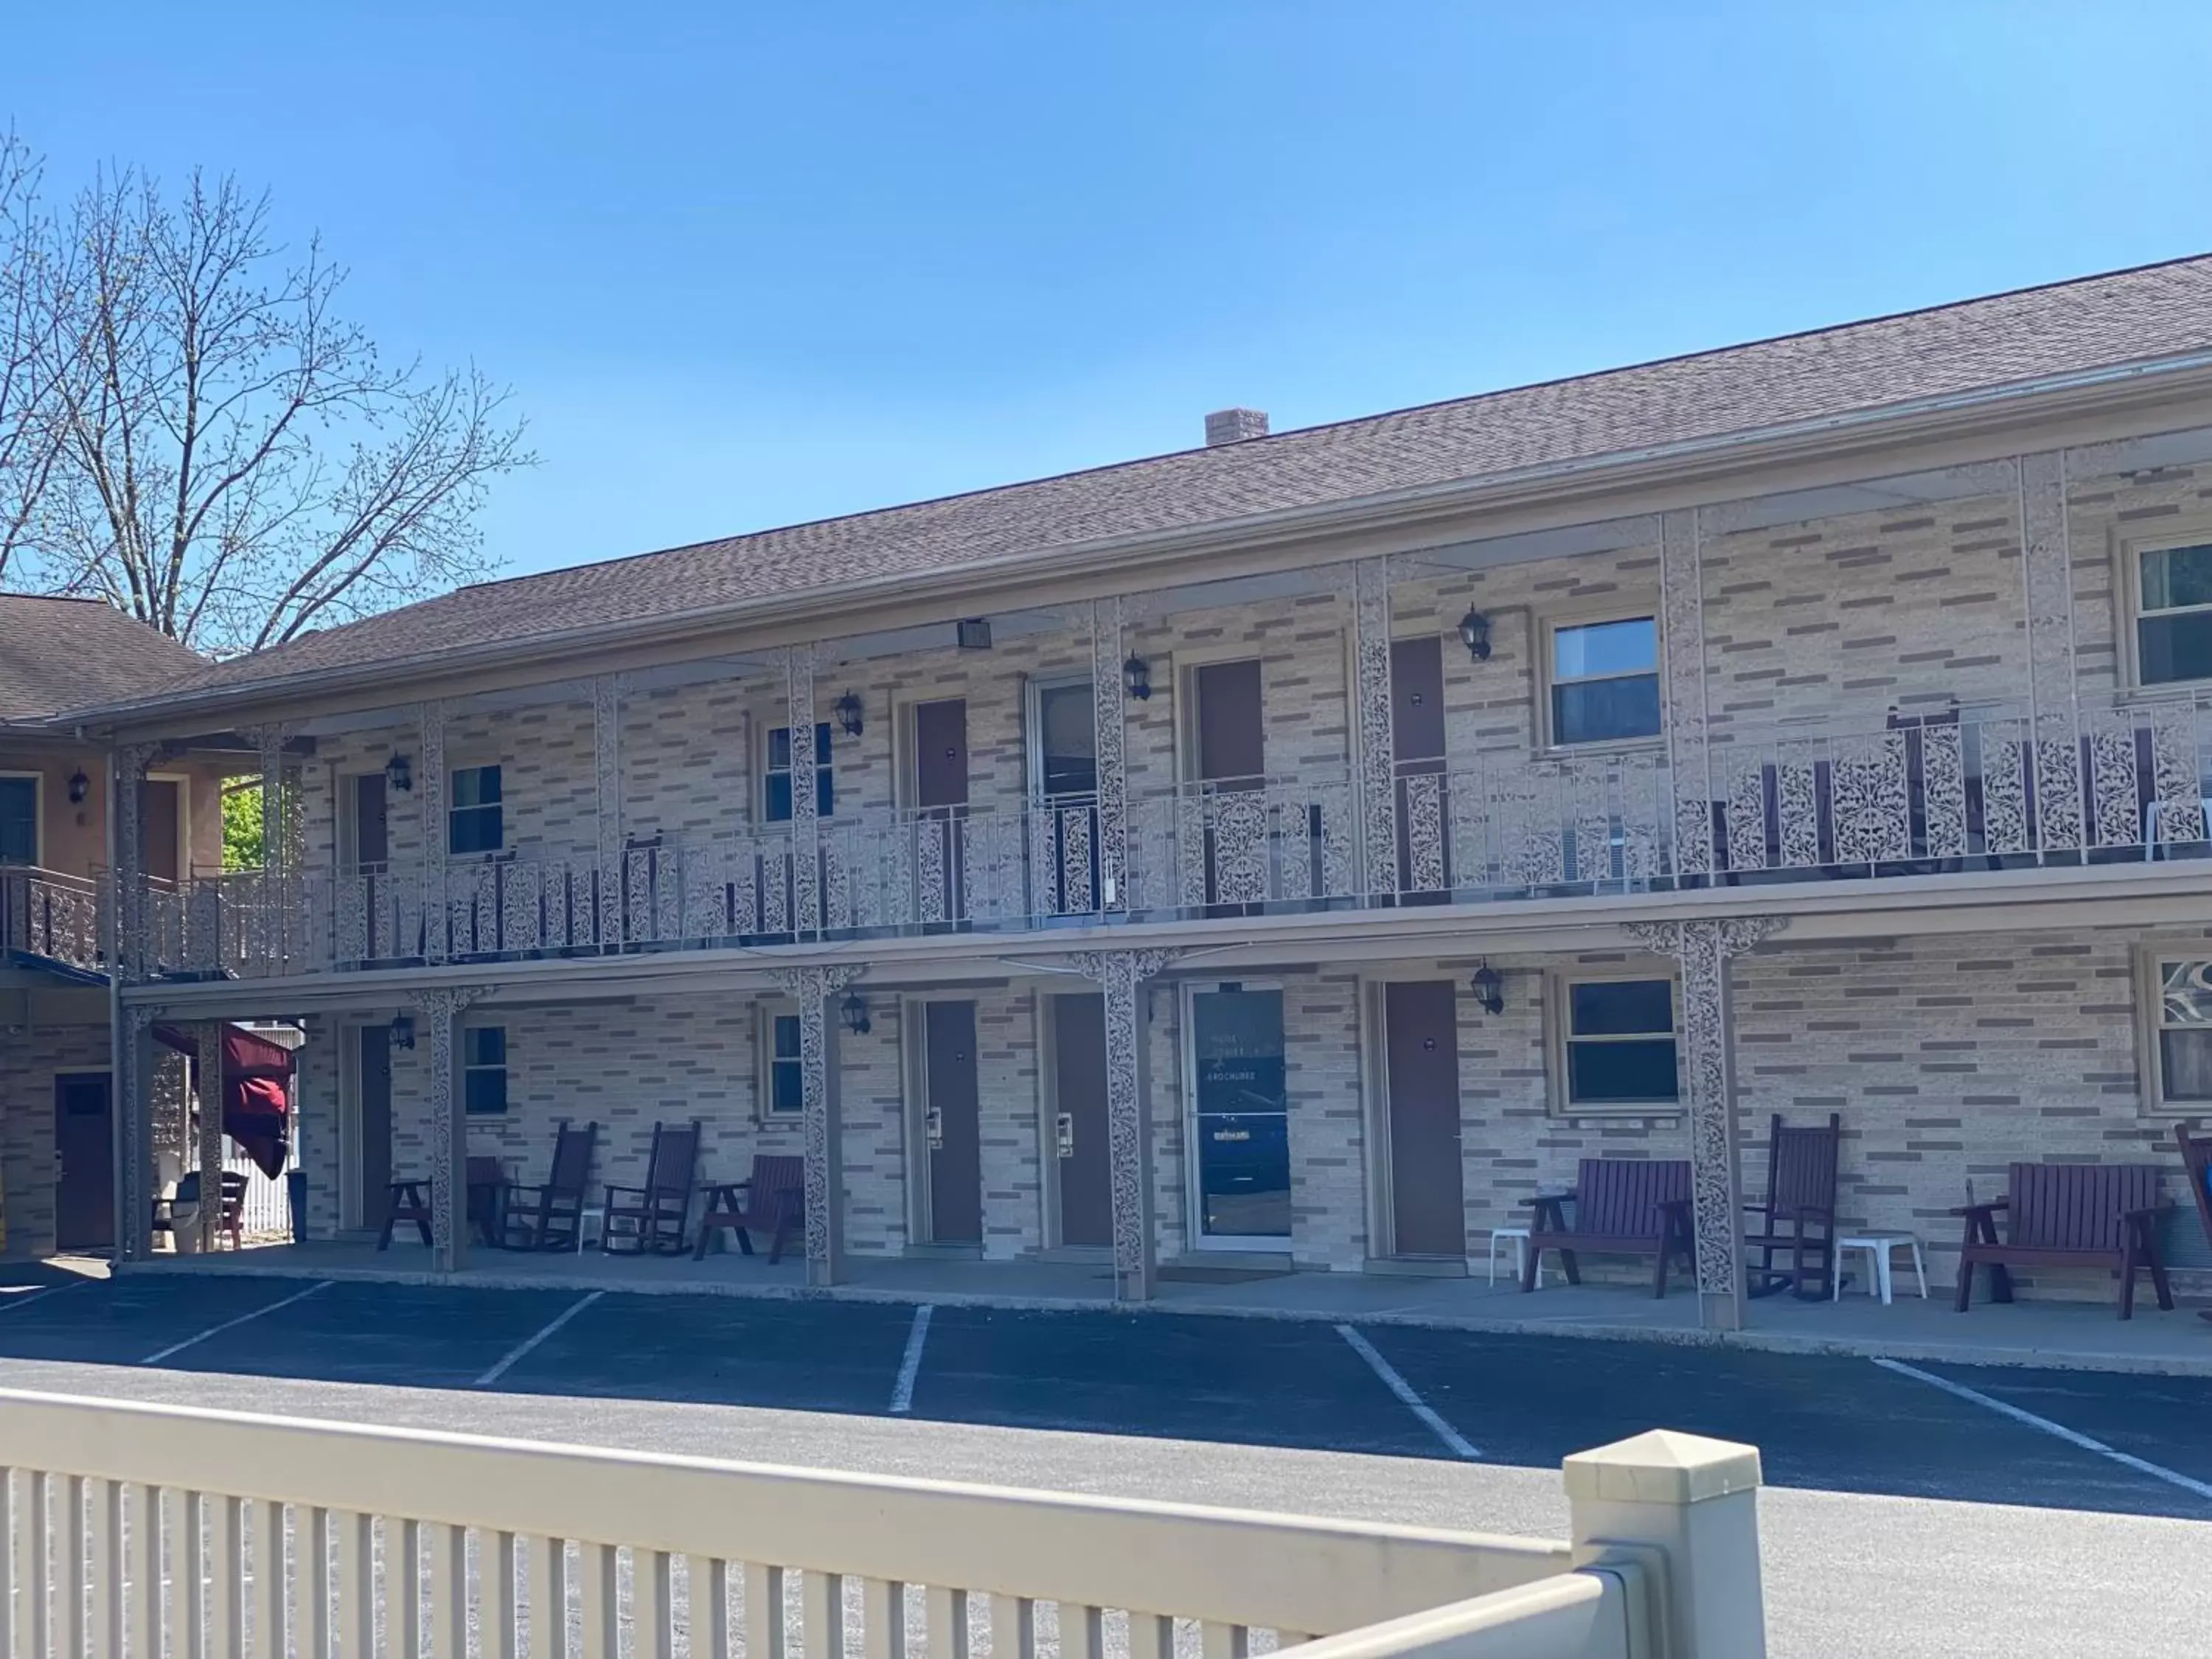 Property Building in White Rose Motel - Hershey